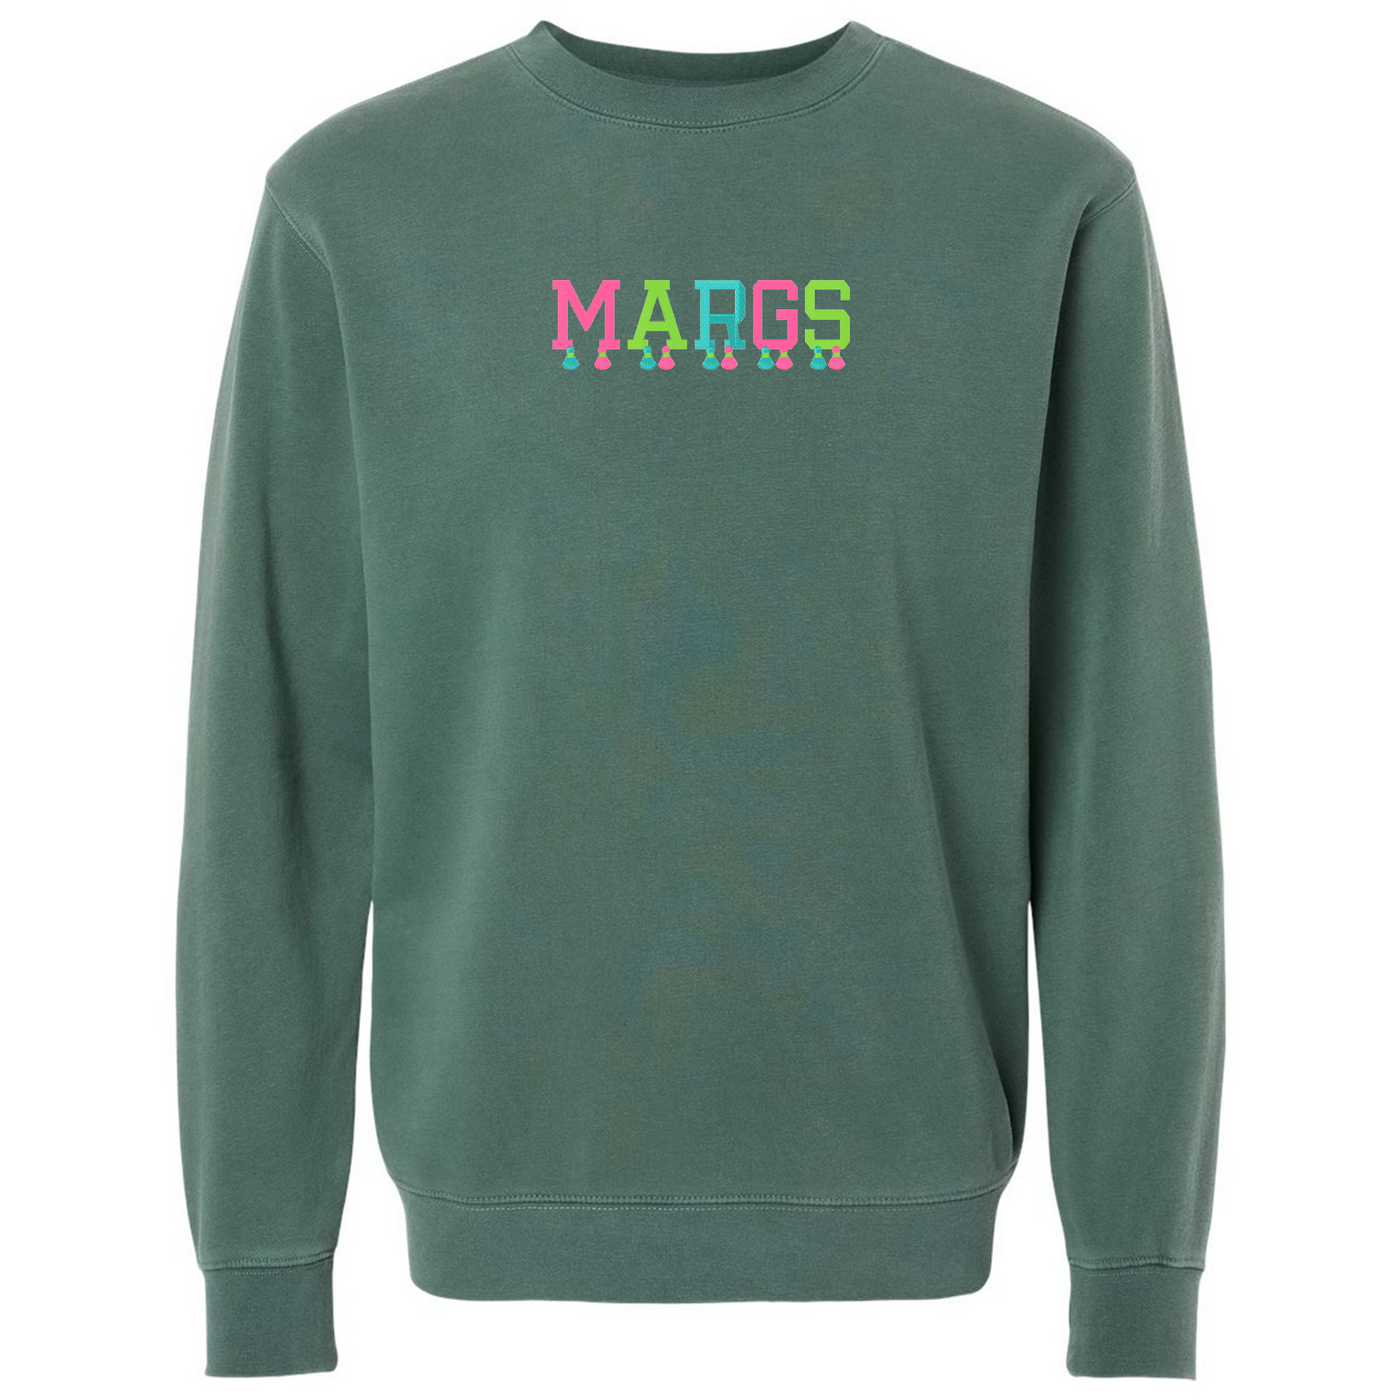 Embroidered Tasseled 'Margs' Cozy Crew